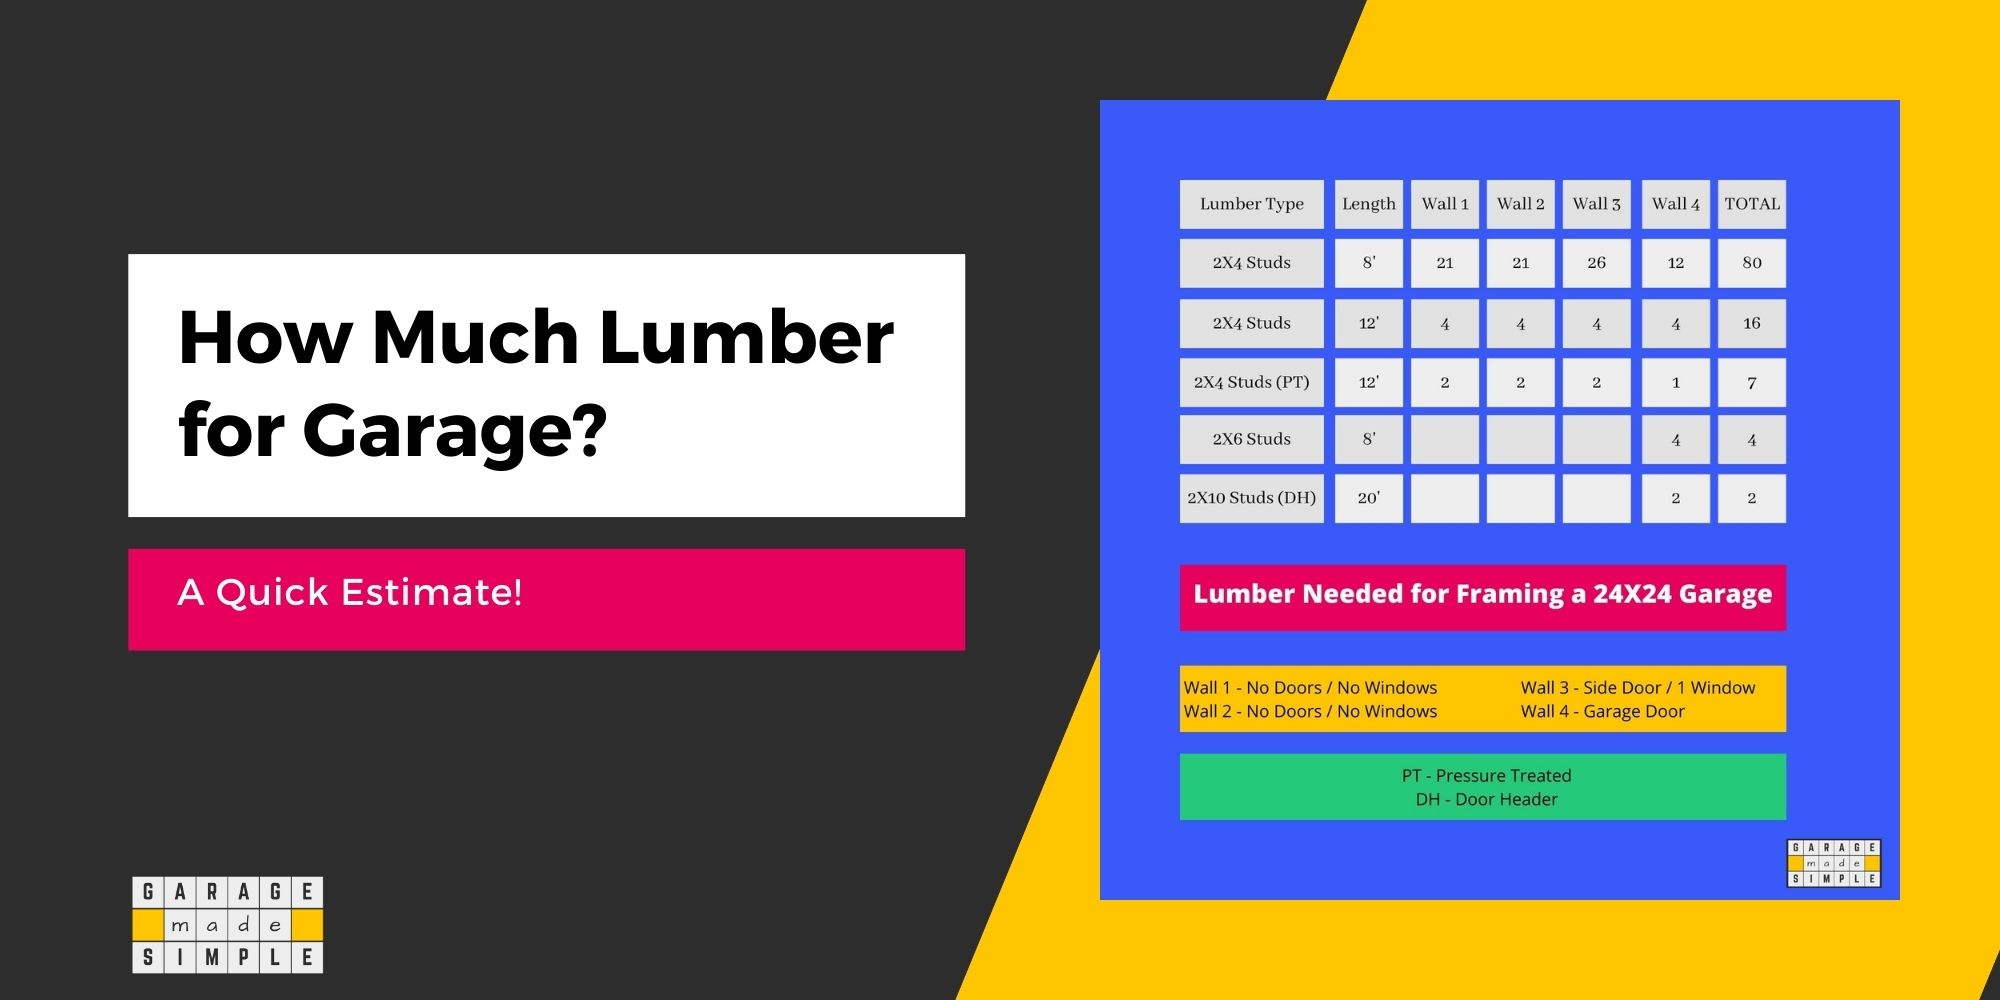 How Much Lumber Do You Need To Frame Your New Garage? Helpful Guide